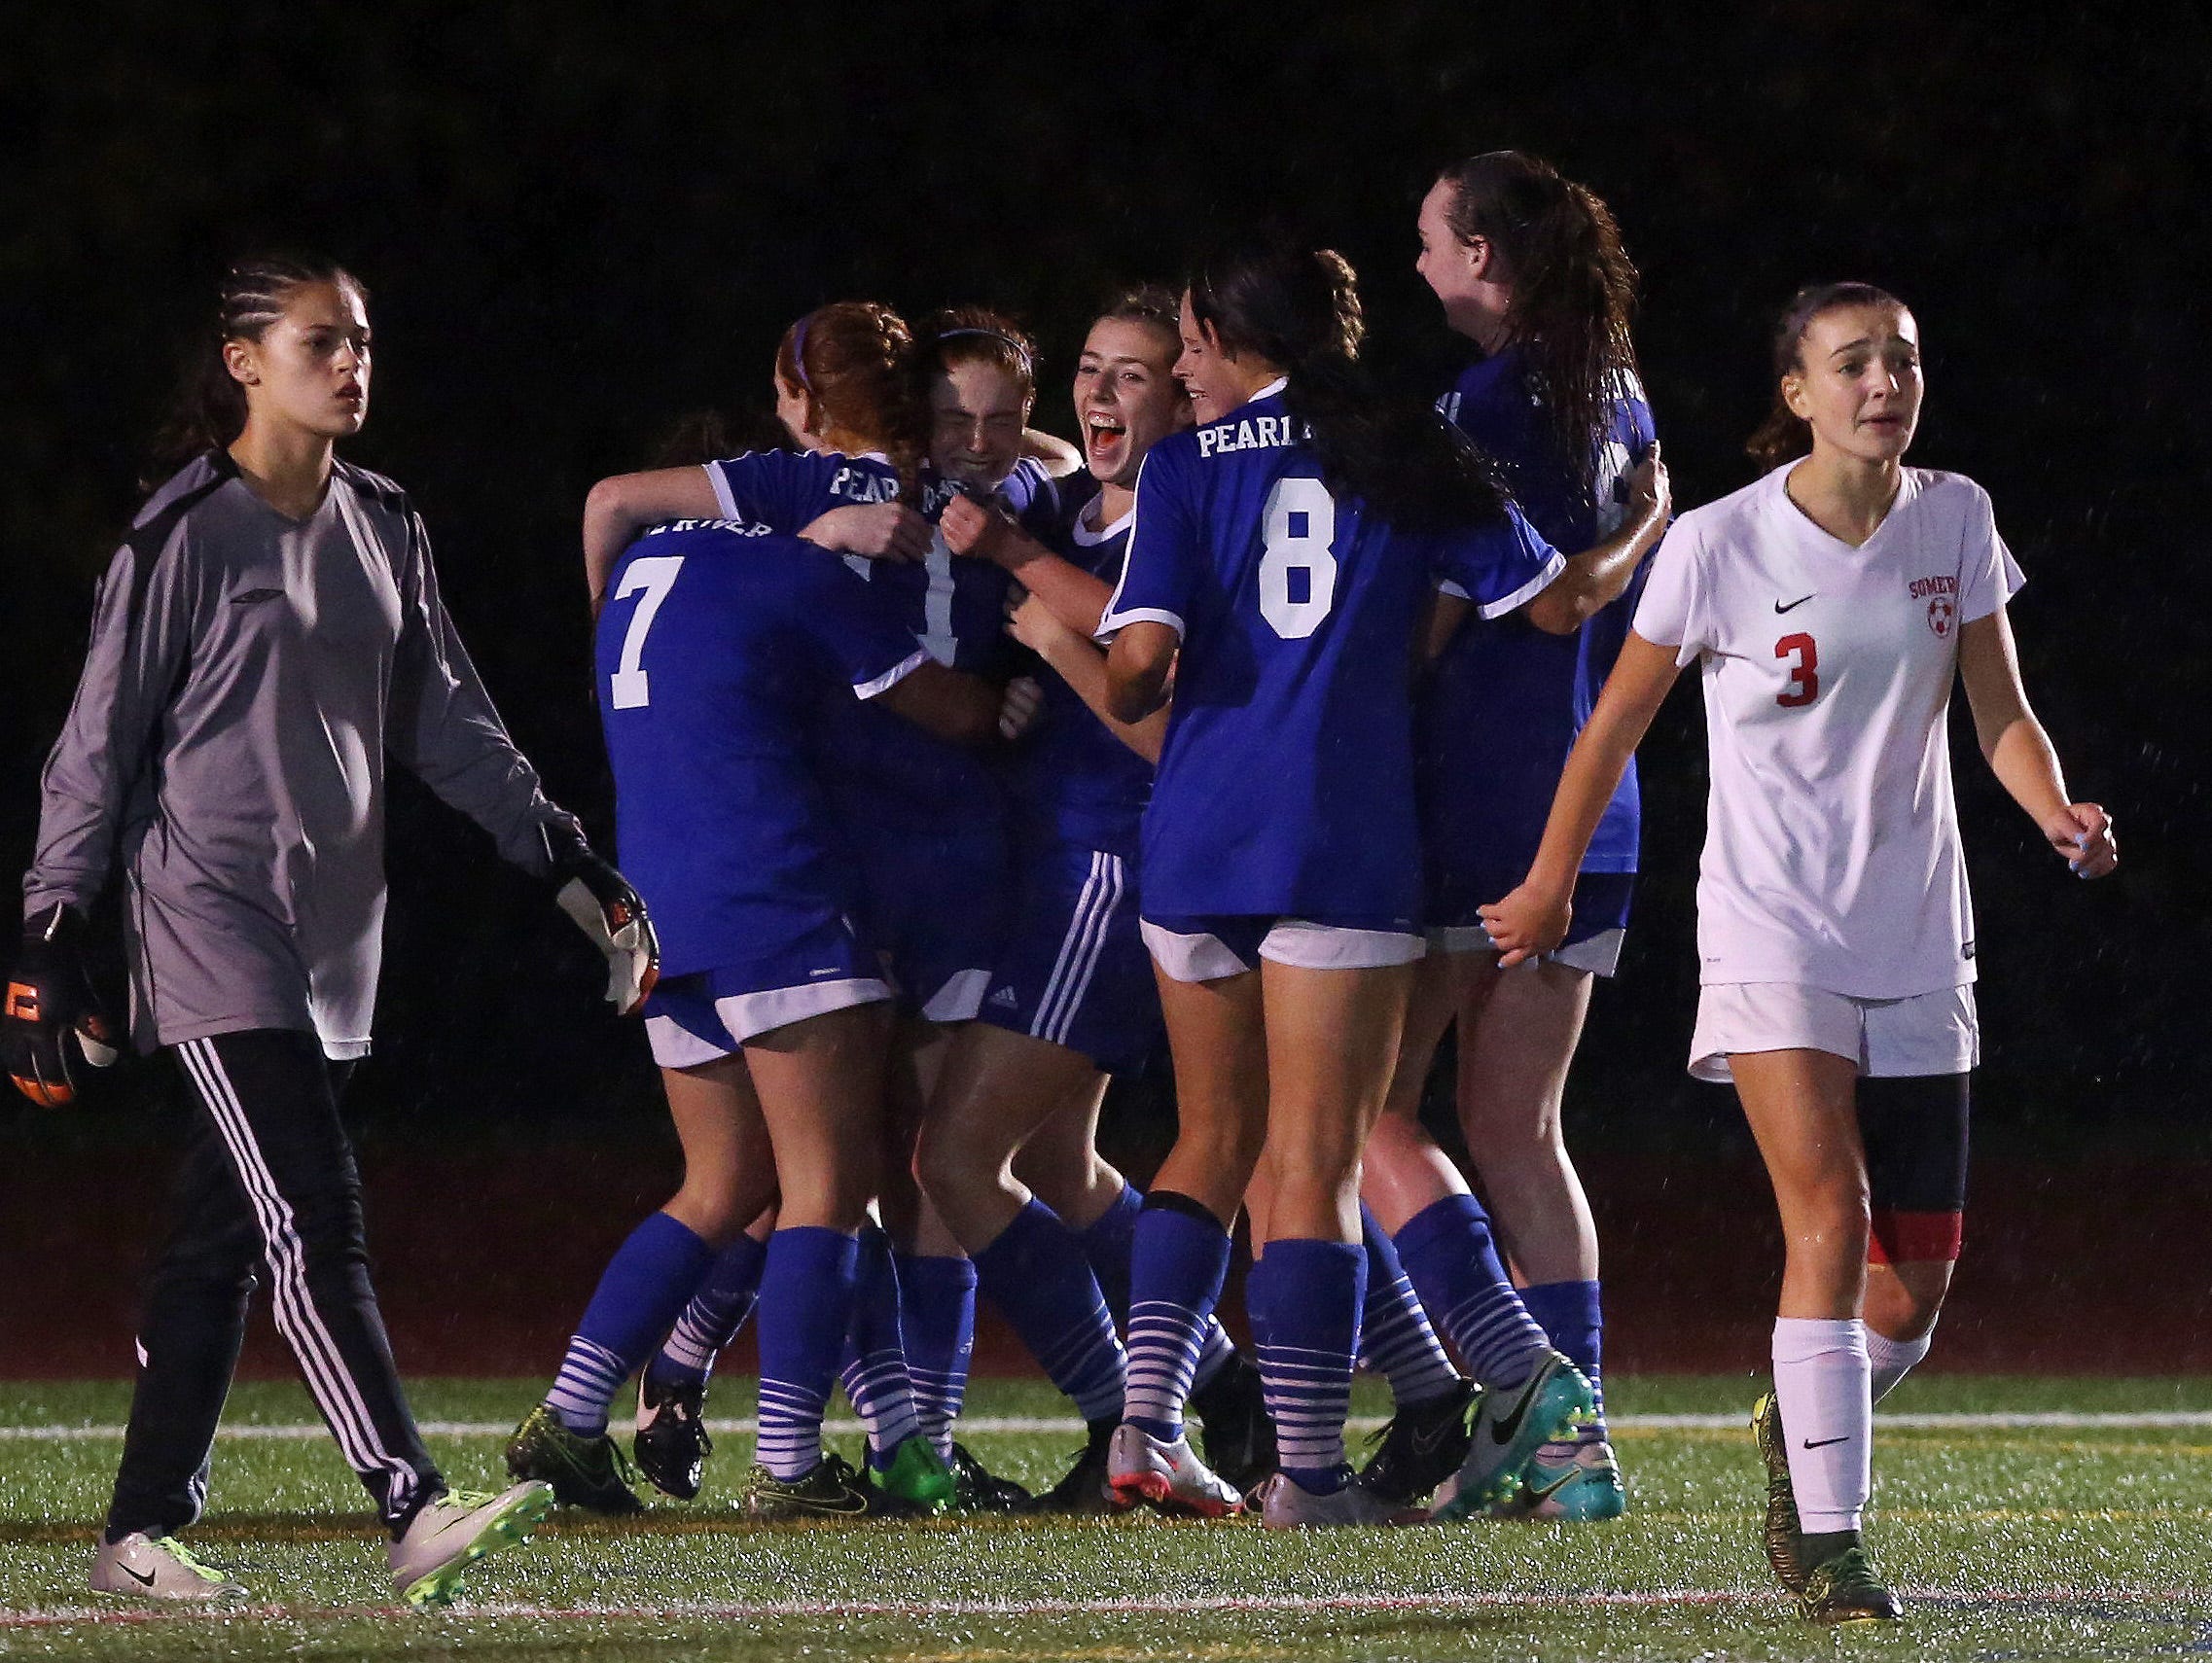 Pearl River players celebrate a second half go ahead goal by Shaelynn Guilfoyle against Somers in the girls soccer Section 1 Class AA championship game at Yorktown High School Oct. 30, 2016. Pearl River won the game 2-1.